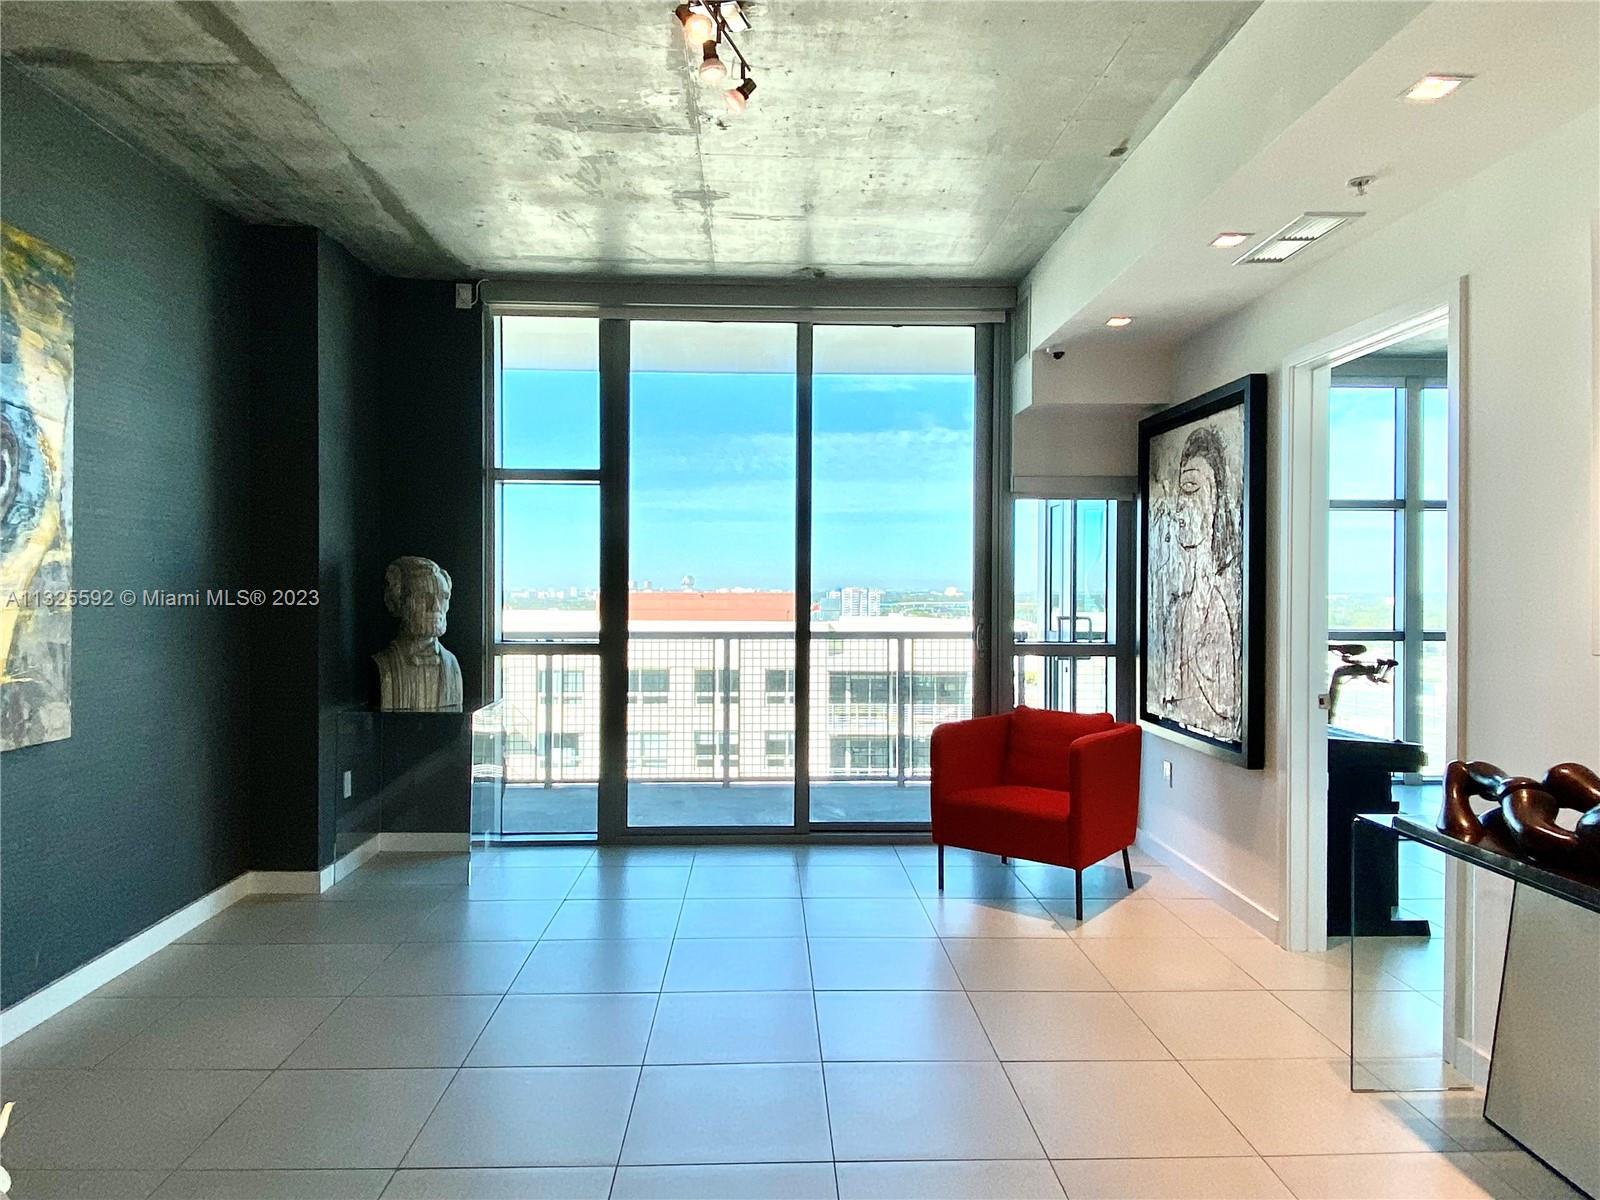 Great location for this spacious 1 bedroom, 1.5 bathrooms modern condo with beautiful city and sunse